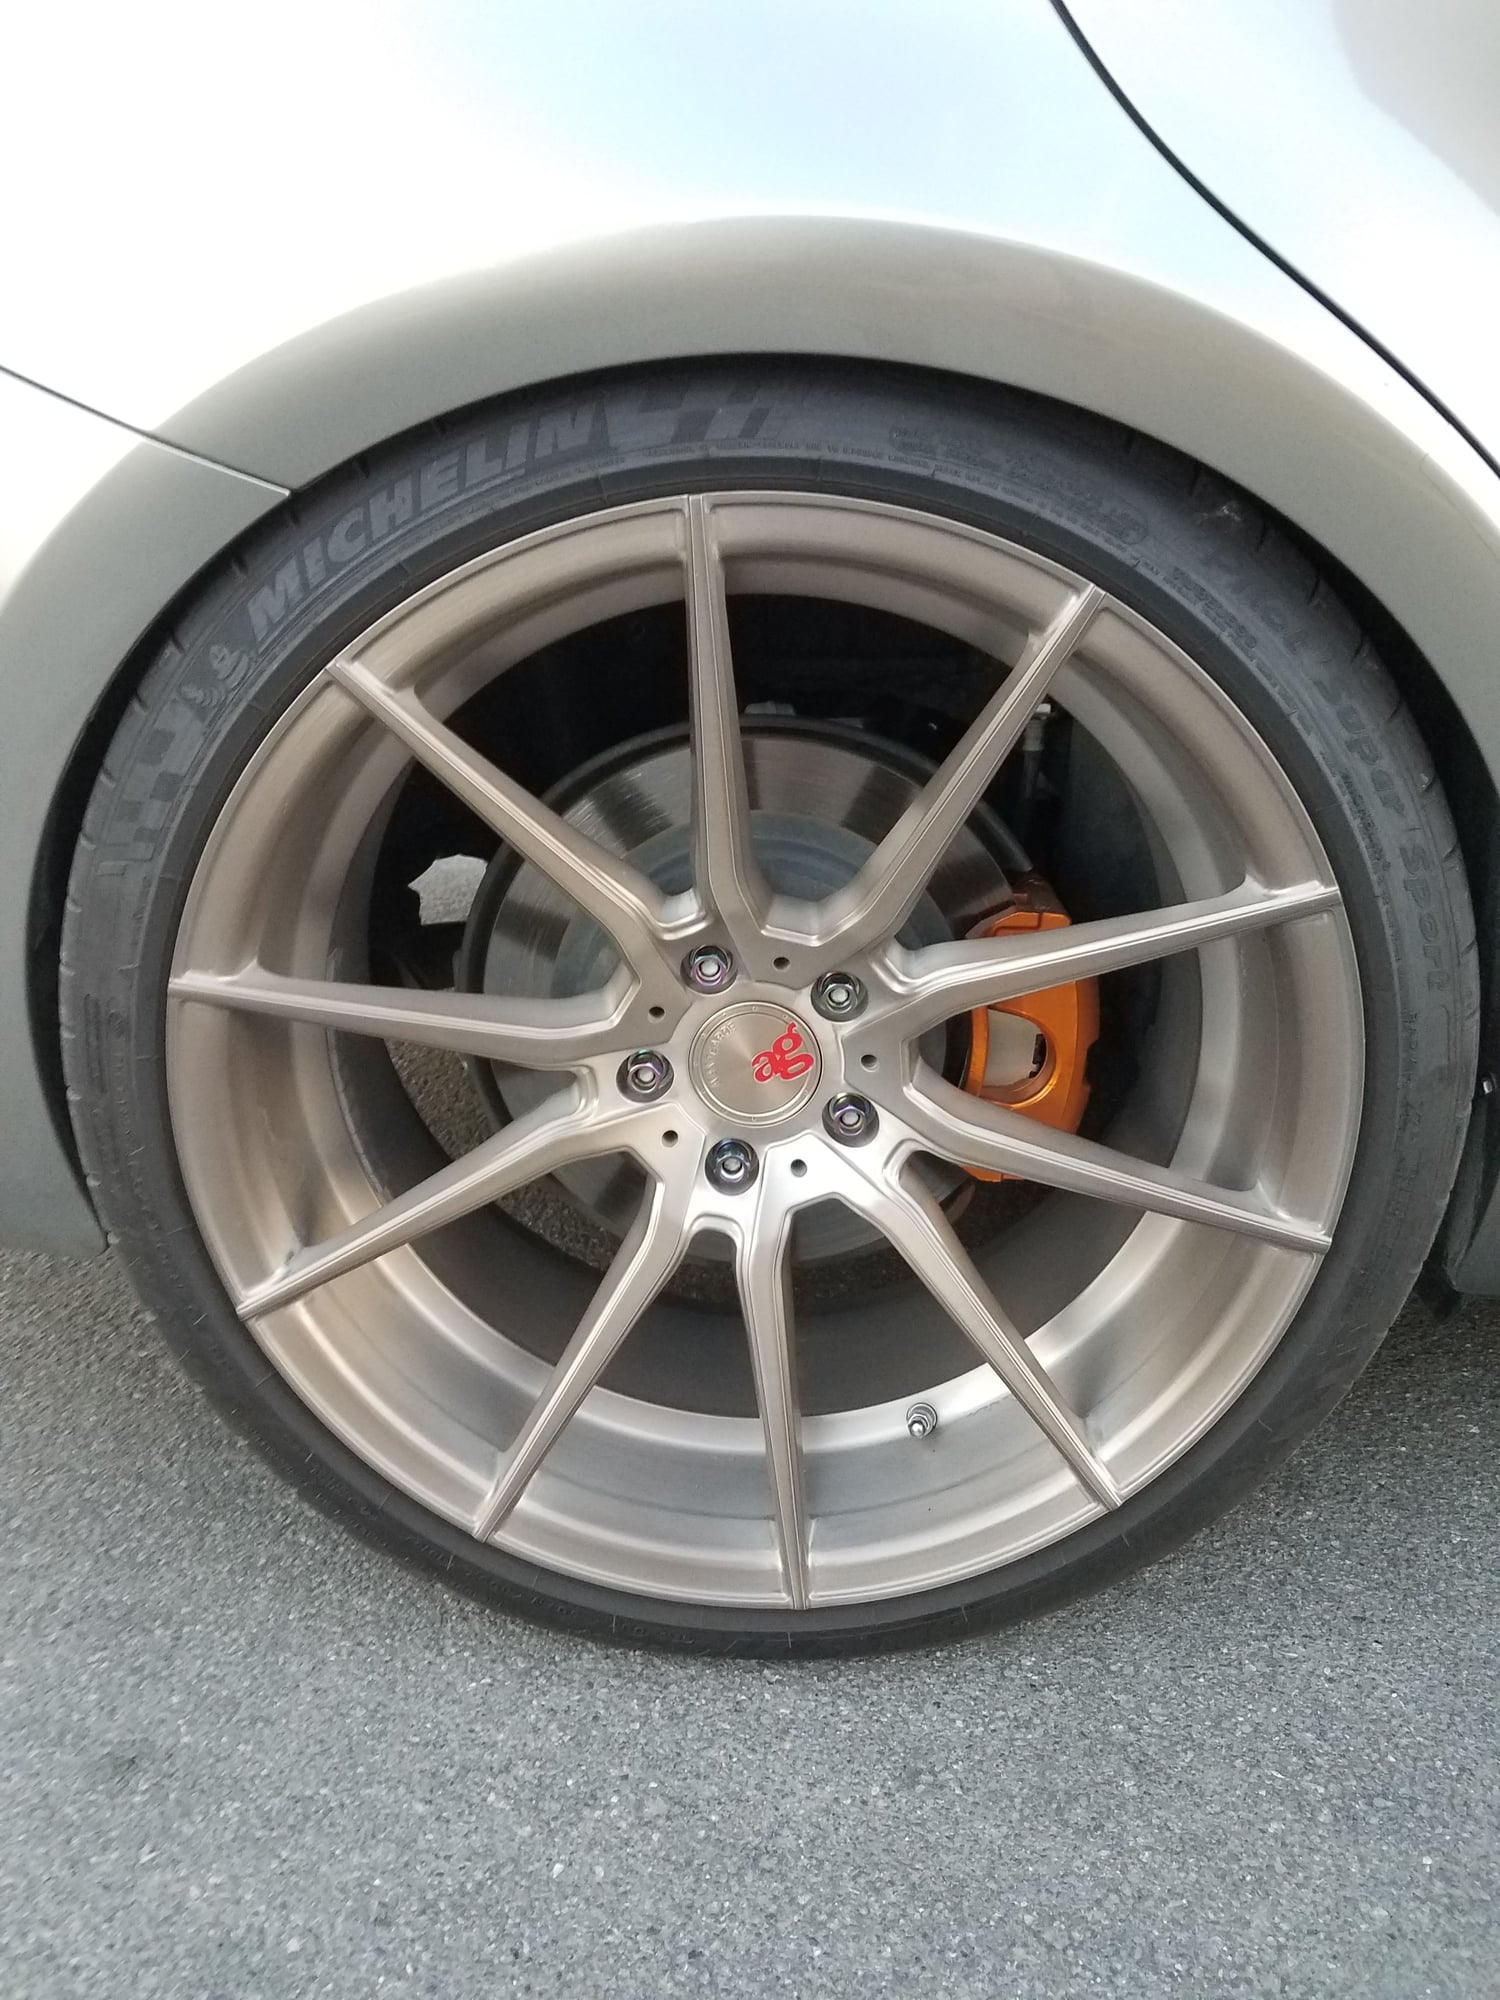 Wheels and Tires/Axles - AG M652 W/ Michelin's 20 in Flow Forged Wheels - Used - All Years Lexus All Models - Pleasant Grove, UT 84062, United States